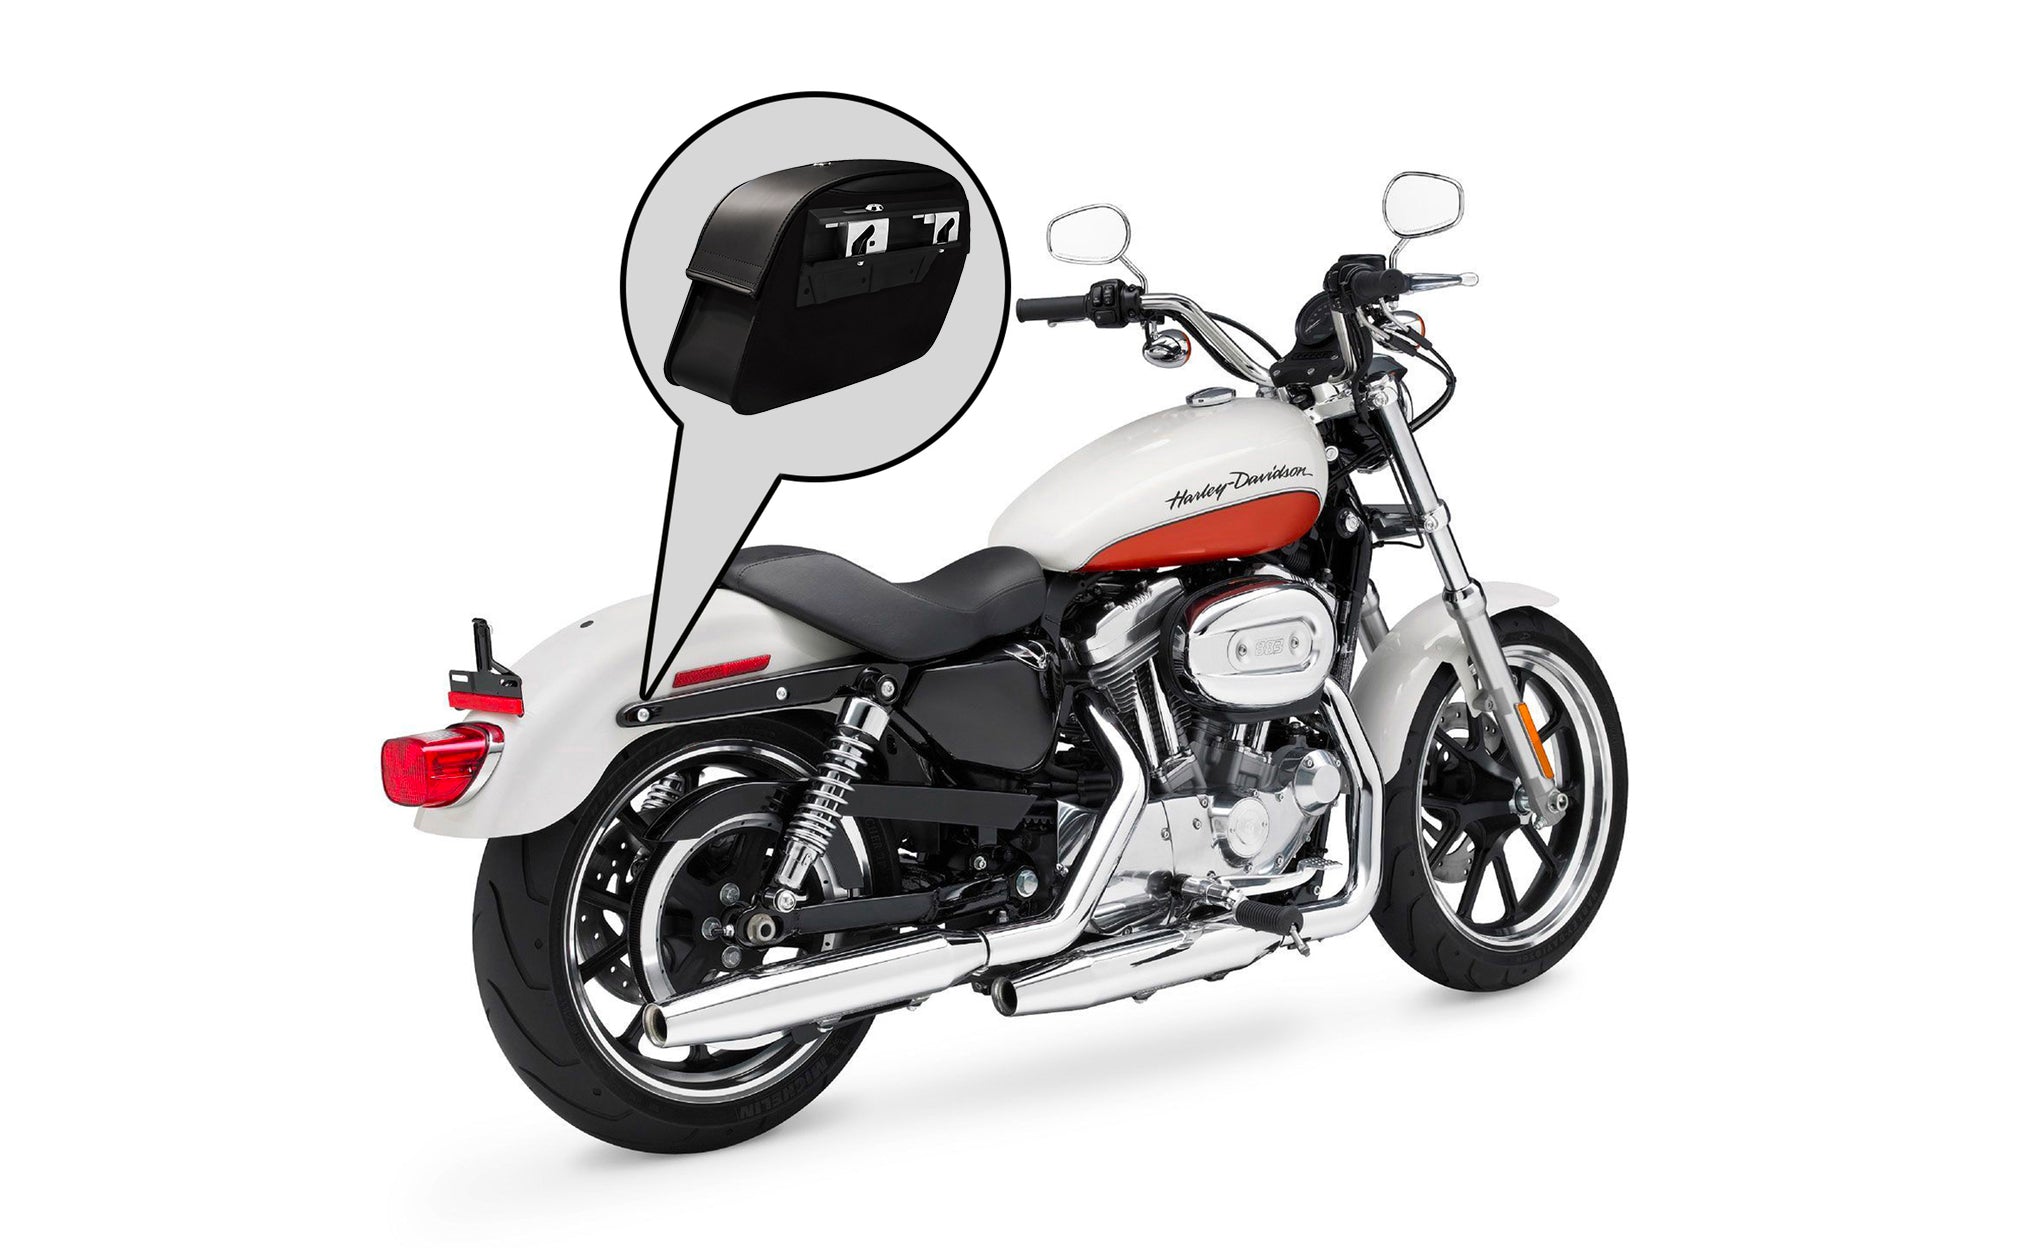 Viking Saddlebags Quick Disconnect System For Harley Davidson Street @expand